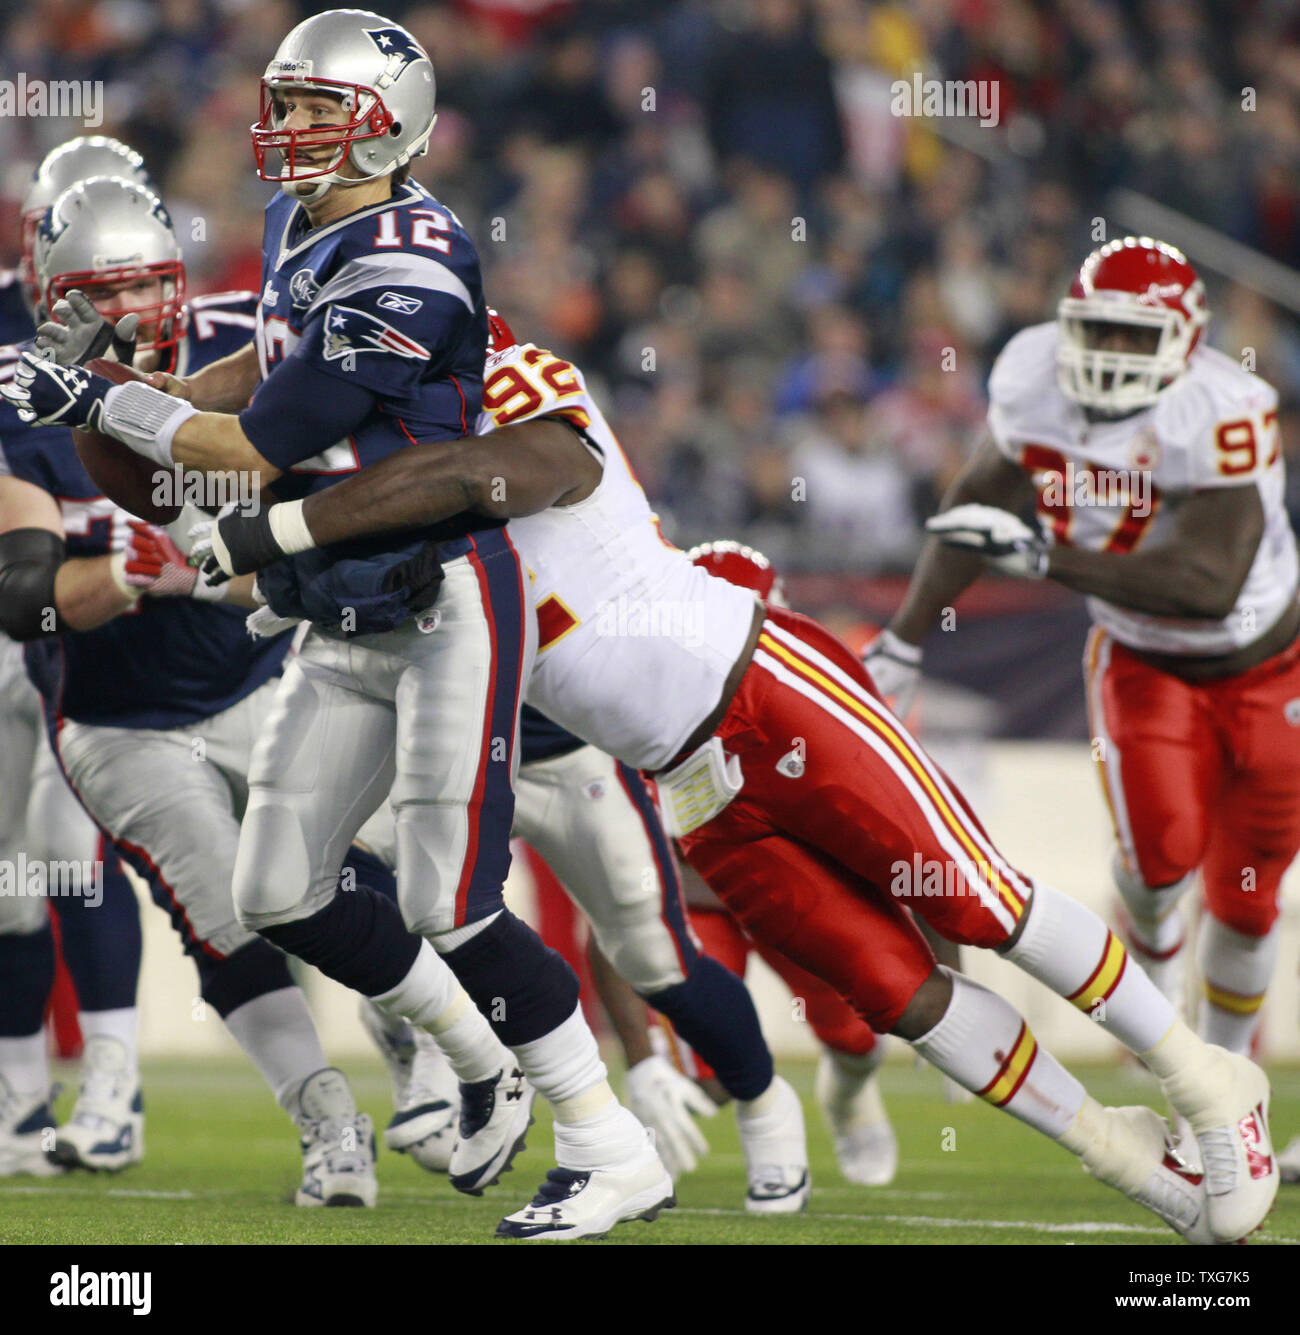 New England Patriots quarterback Tom Brady (12) is sacked by Kansas City Chiefs defensive end Wallace Gilberry in the second quarter at Gillette Stadium in Foxboro, Massachusetts on November 21, 2011.    UPI/Matthew Healey Stock Photo